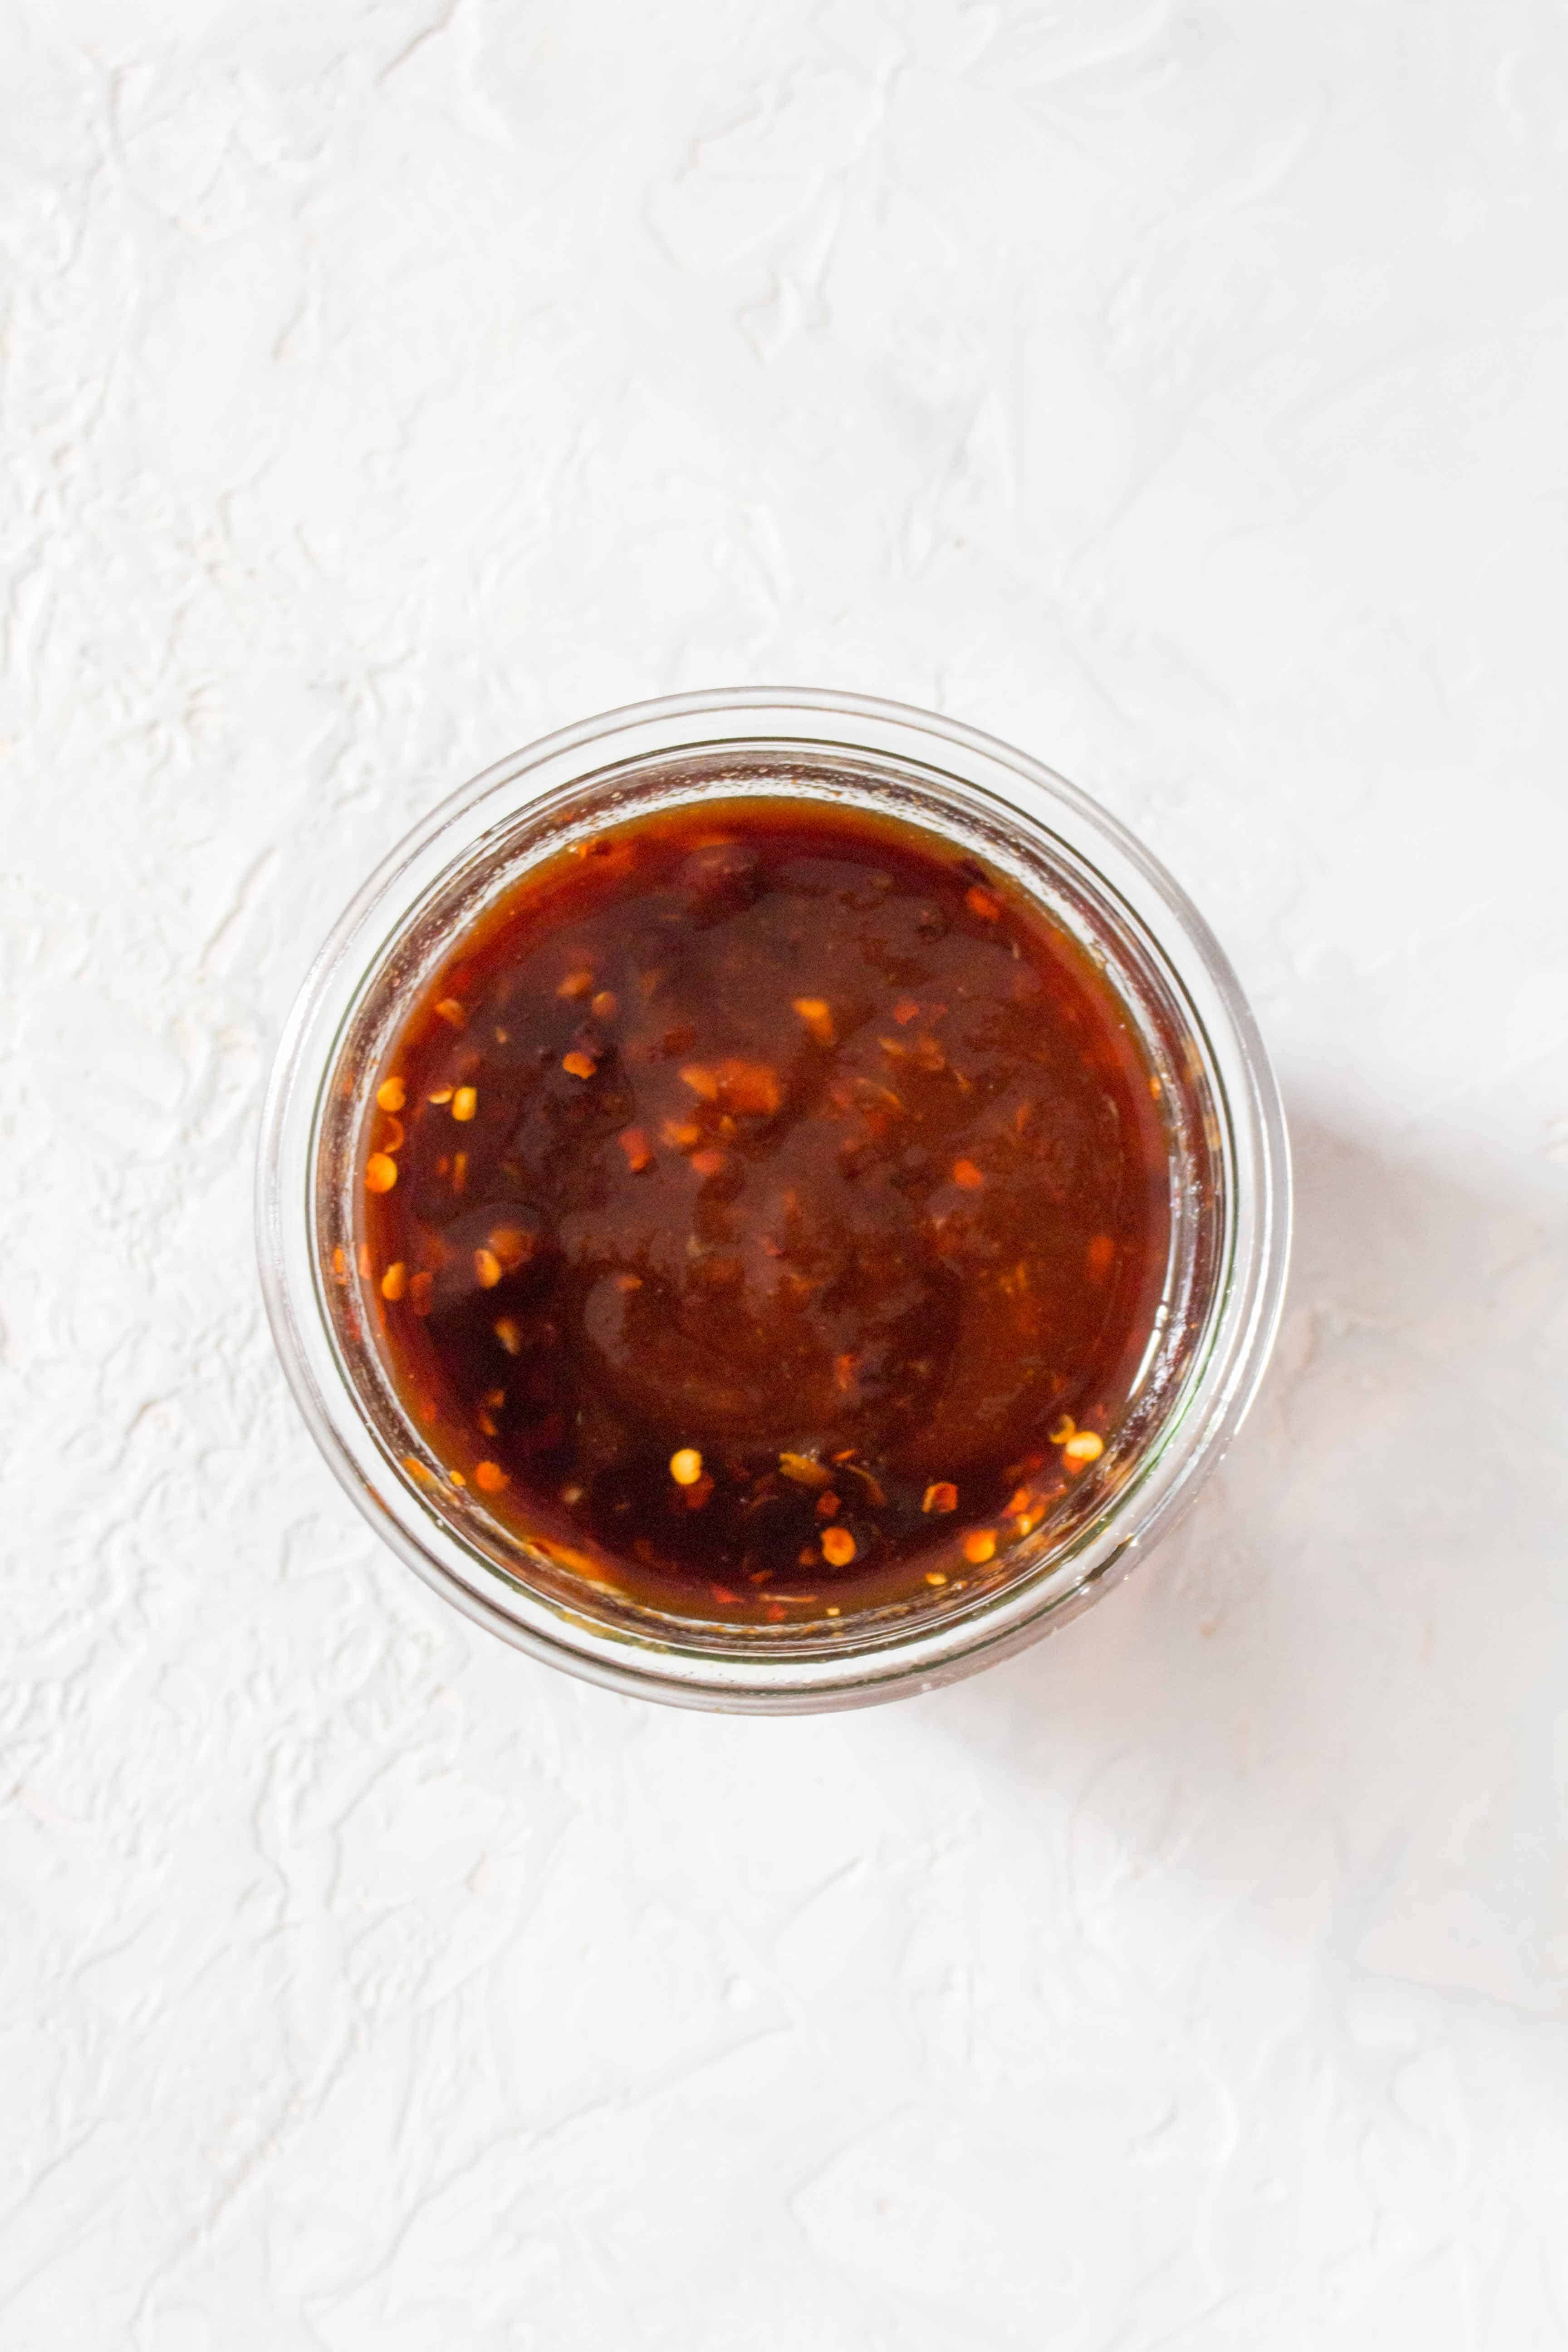 This Firecracker Sauce is the perfect mix of sweet and spicy. Perfect for quick stir fry meals, marinating meat, or just as a dip, you're going to want to keep this Firecracker Sauce in your back pocket for a last minute bold flavour!